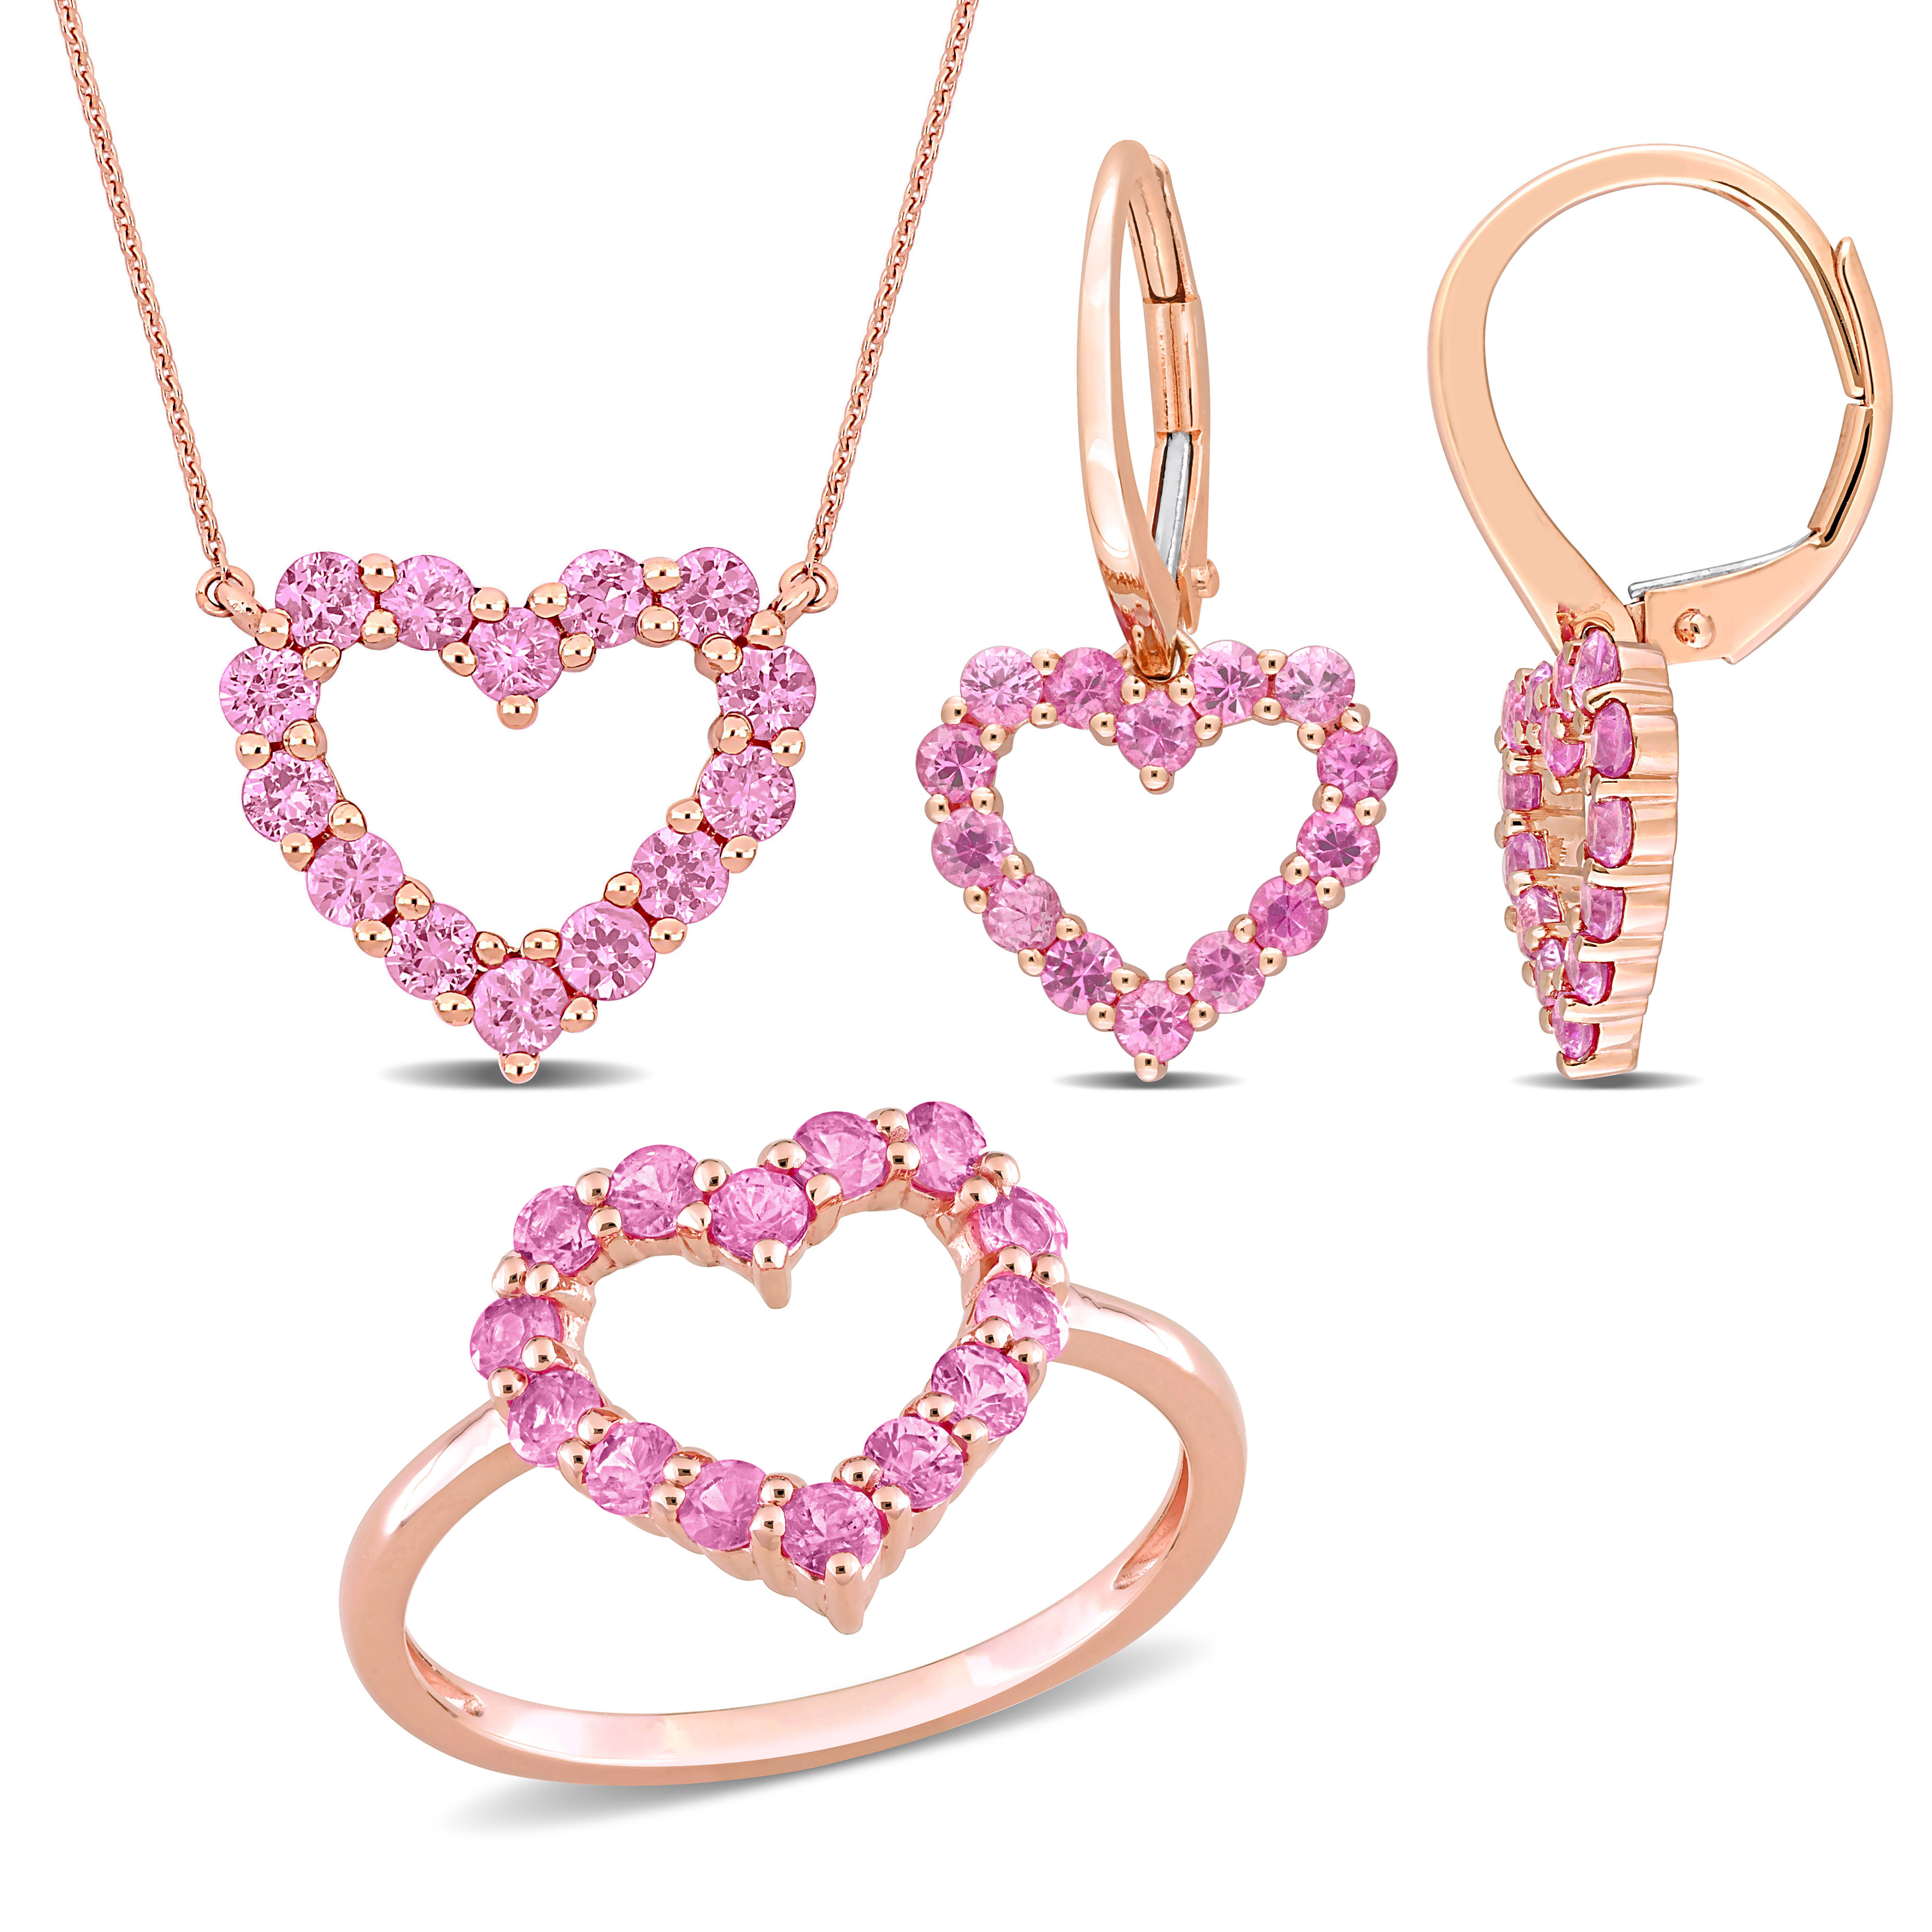 3 1/5 CT TGW Pink Sapphire 3-Piece Jewelry Set - Heart Pendant with Chain, Earrings and Ring in 10k Rose Gold